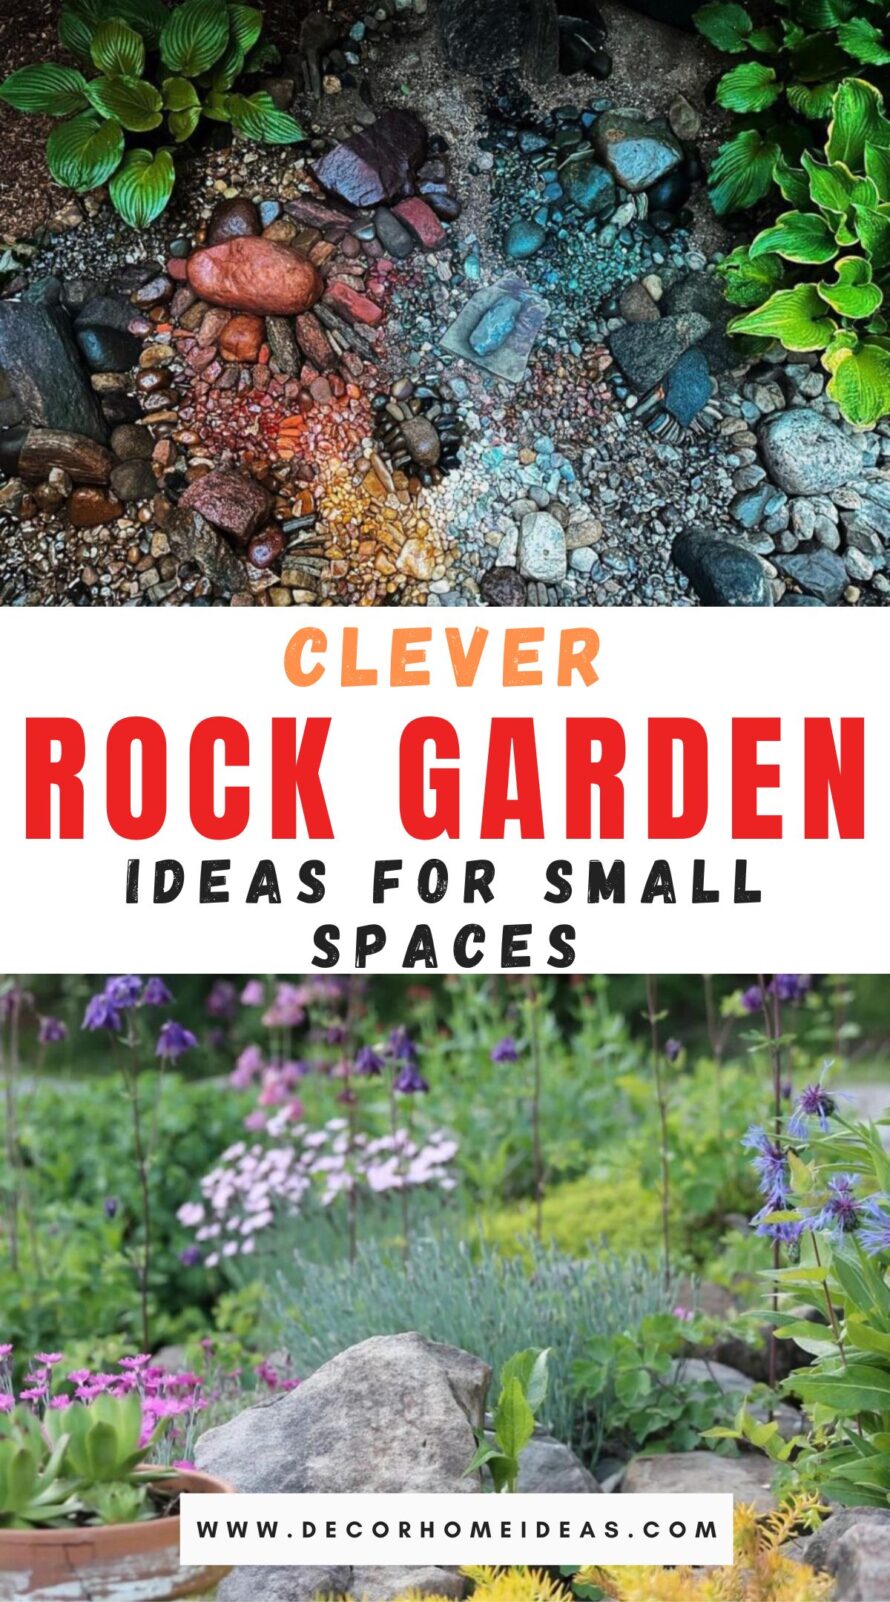 Explore clever rock garden ideas tailored for small spaces. From vertical rock gardens to strategically placed stones amidst colorful plants, these creative designs maximize limited areas, adding texture and visual interest to your outdoor oasis without sacrificing style or functionality.